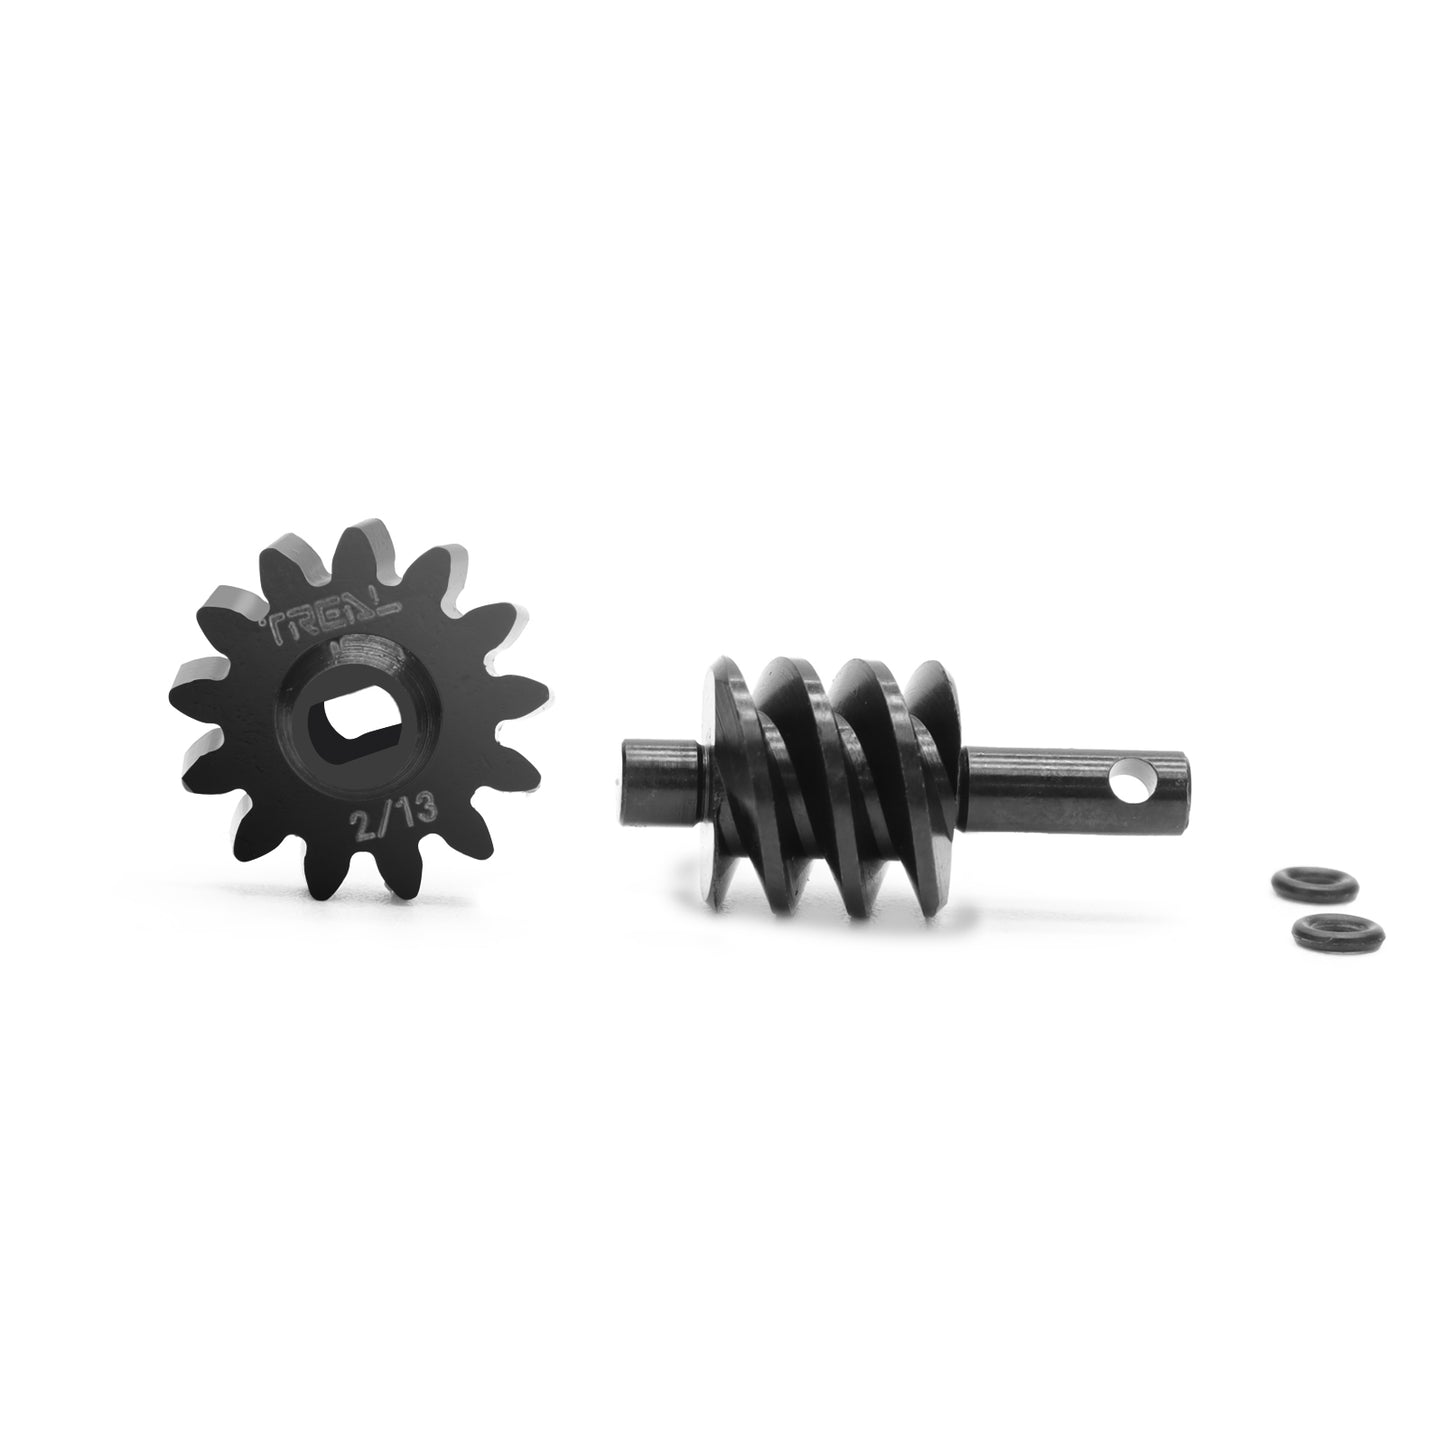 Treal Axial SCX24 Steel Gears Overdrive OD Differential Gears 2/13T